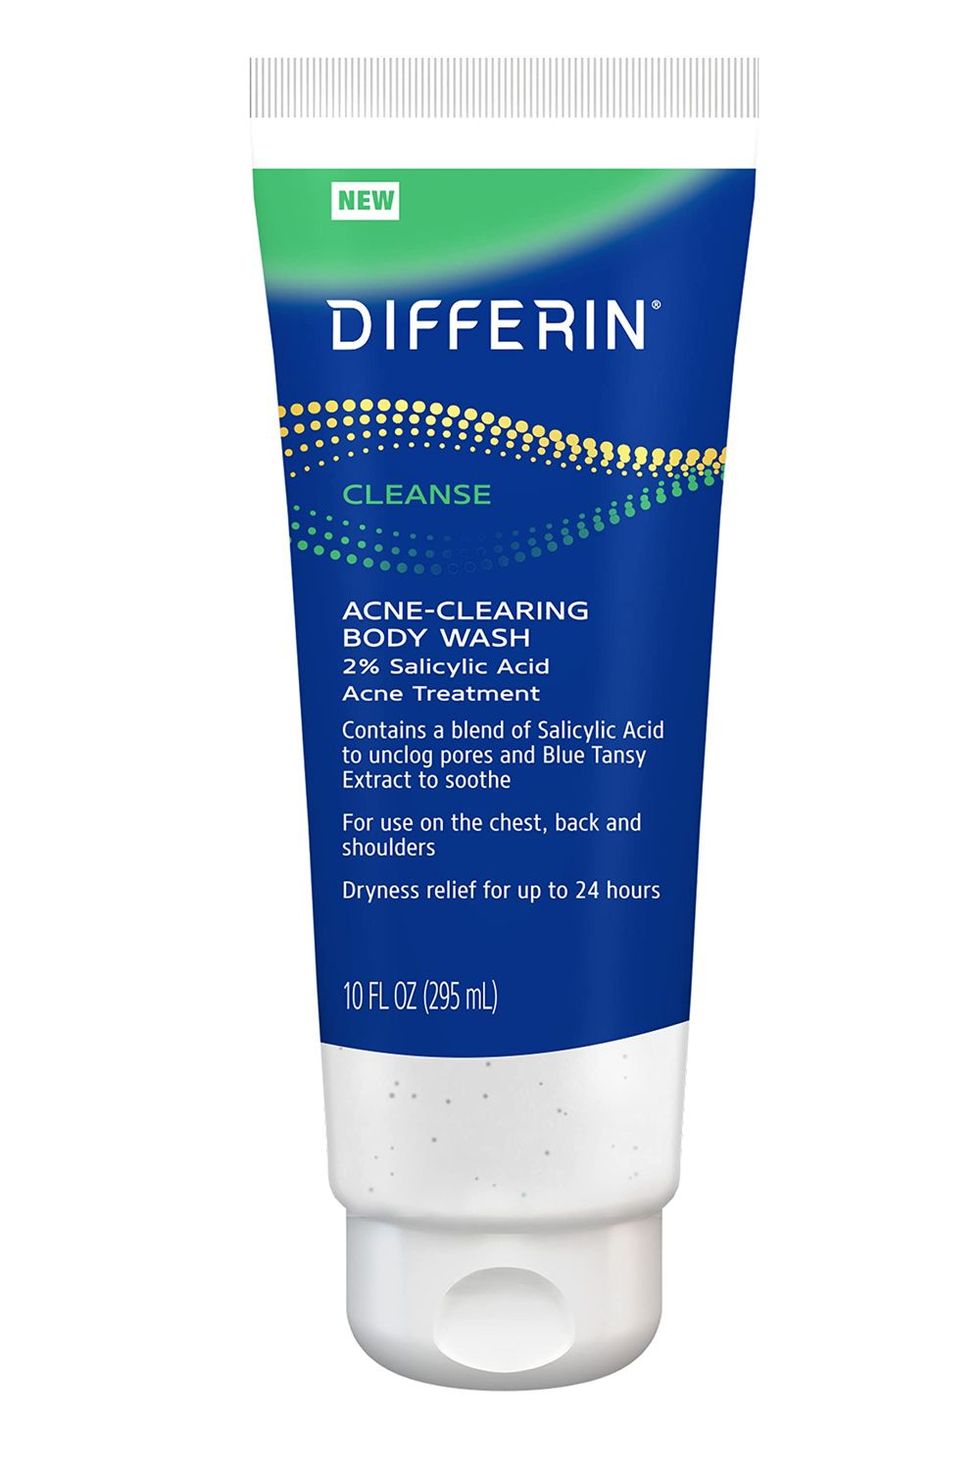 Acne-Clearing Body Wash 